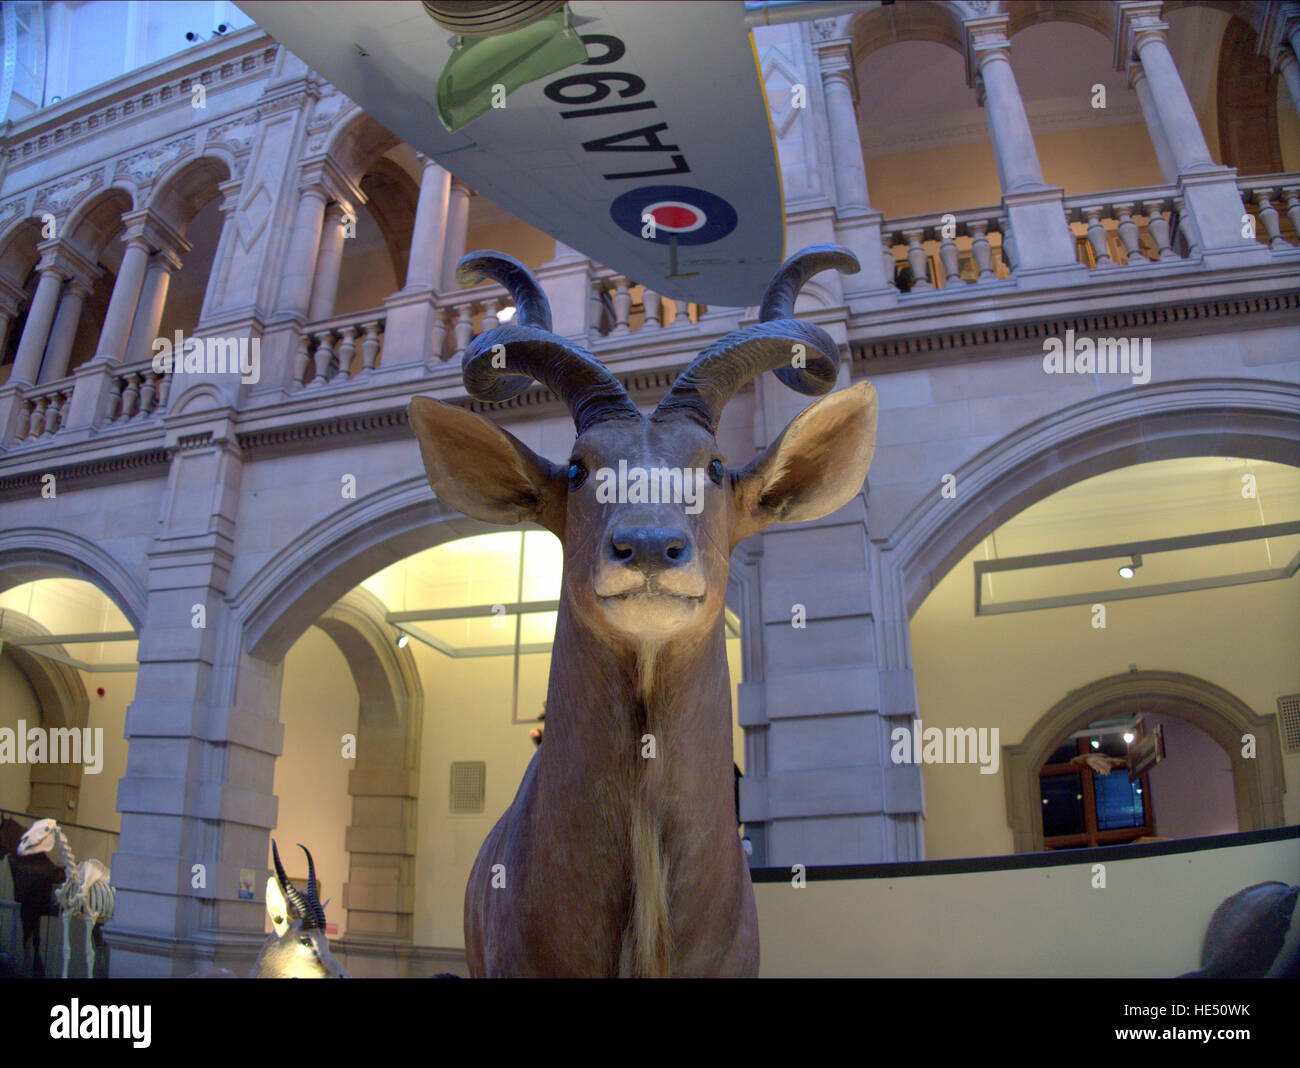 kelvingrove museum and art galleries funny gallery spitfire reference Stock Photo